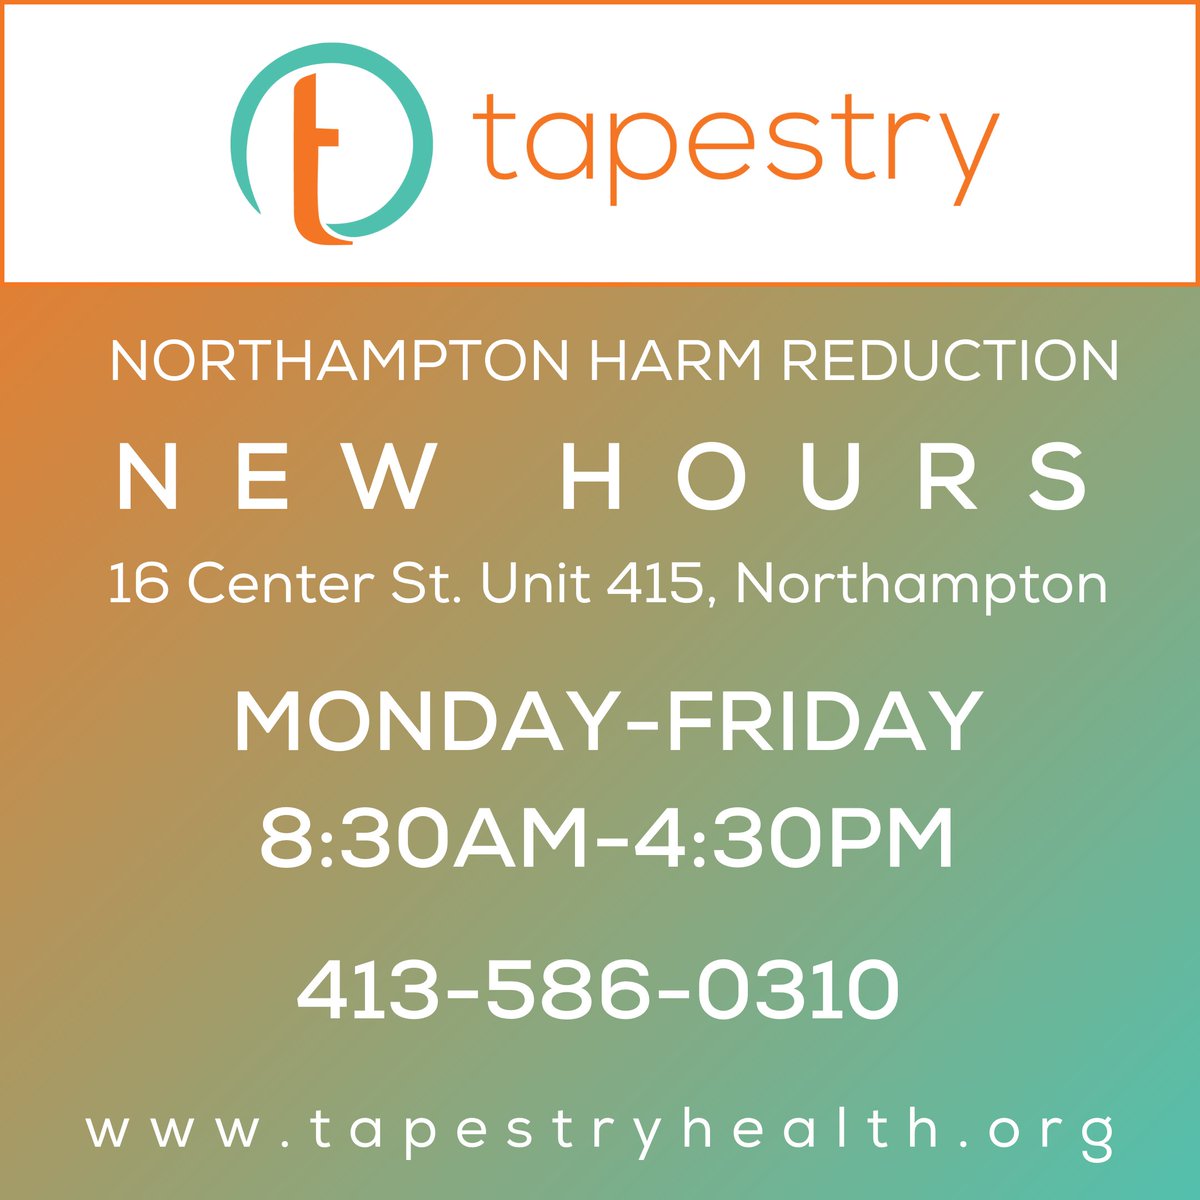 Tapestry's Northampton Harm Reduction site has new hours! 16 Center St. Suite 415, Northampton is now open Mon-Fri 8:30am to 4:30pm. We provide syringe services, Naloxone (Narcan) access and training, STI/STD testing, safer sex and use supplies, and more!  #harmreductionworks